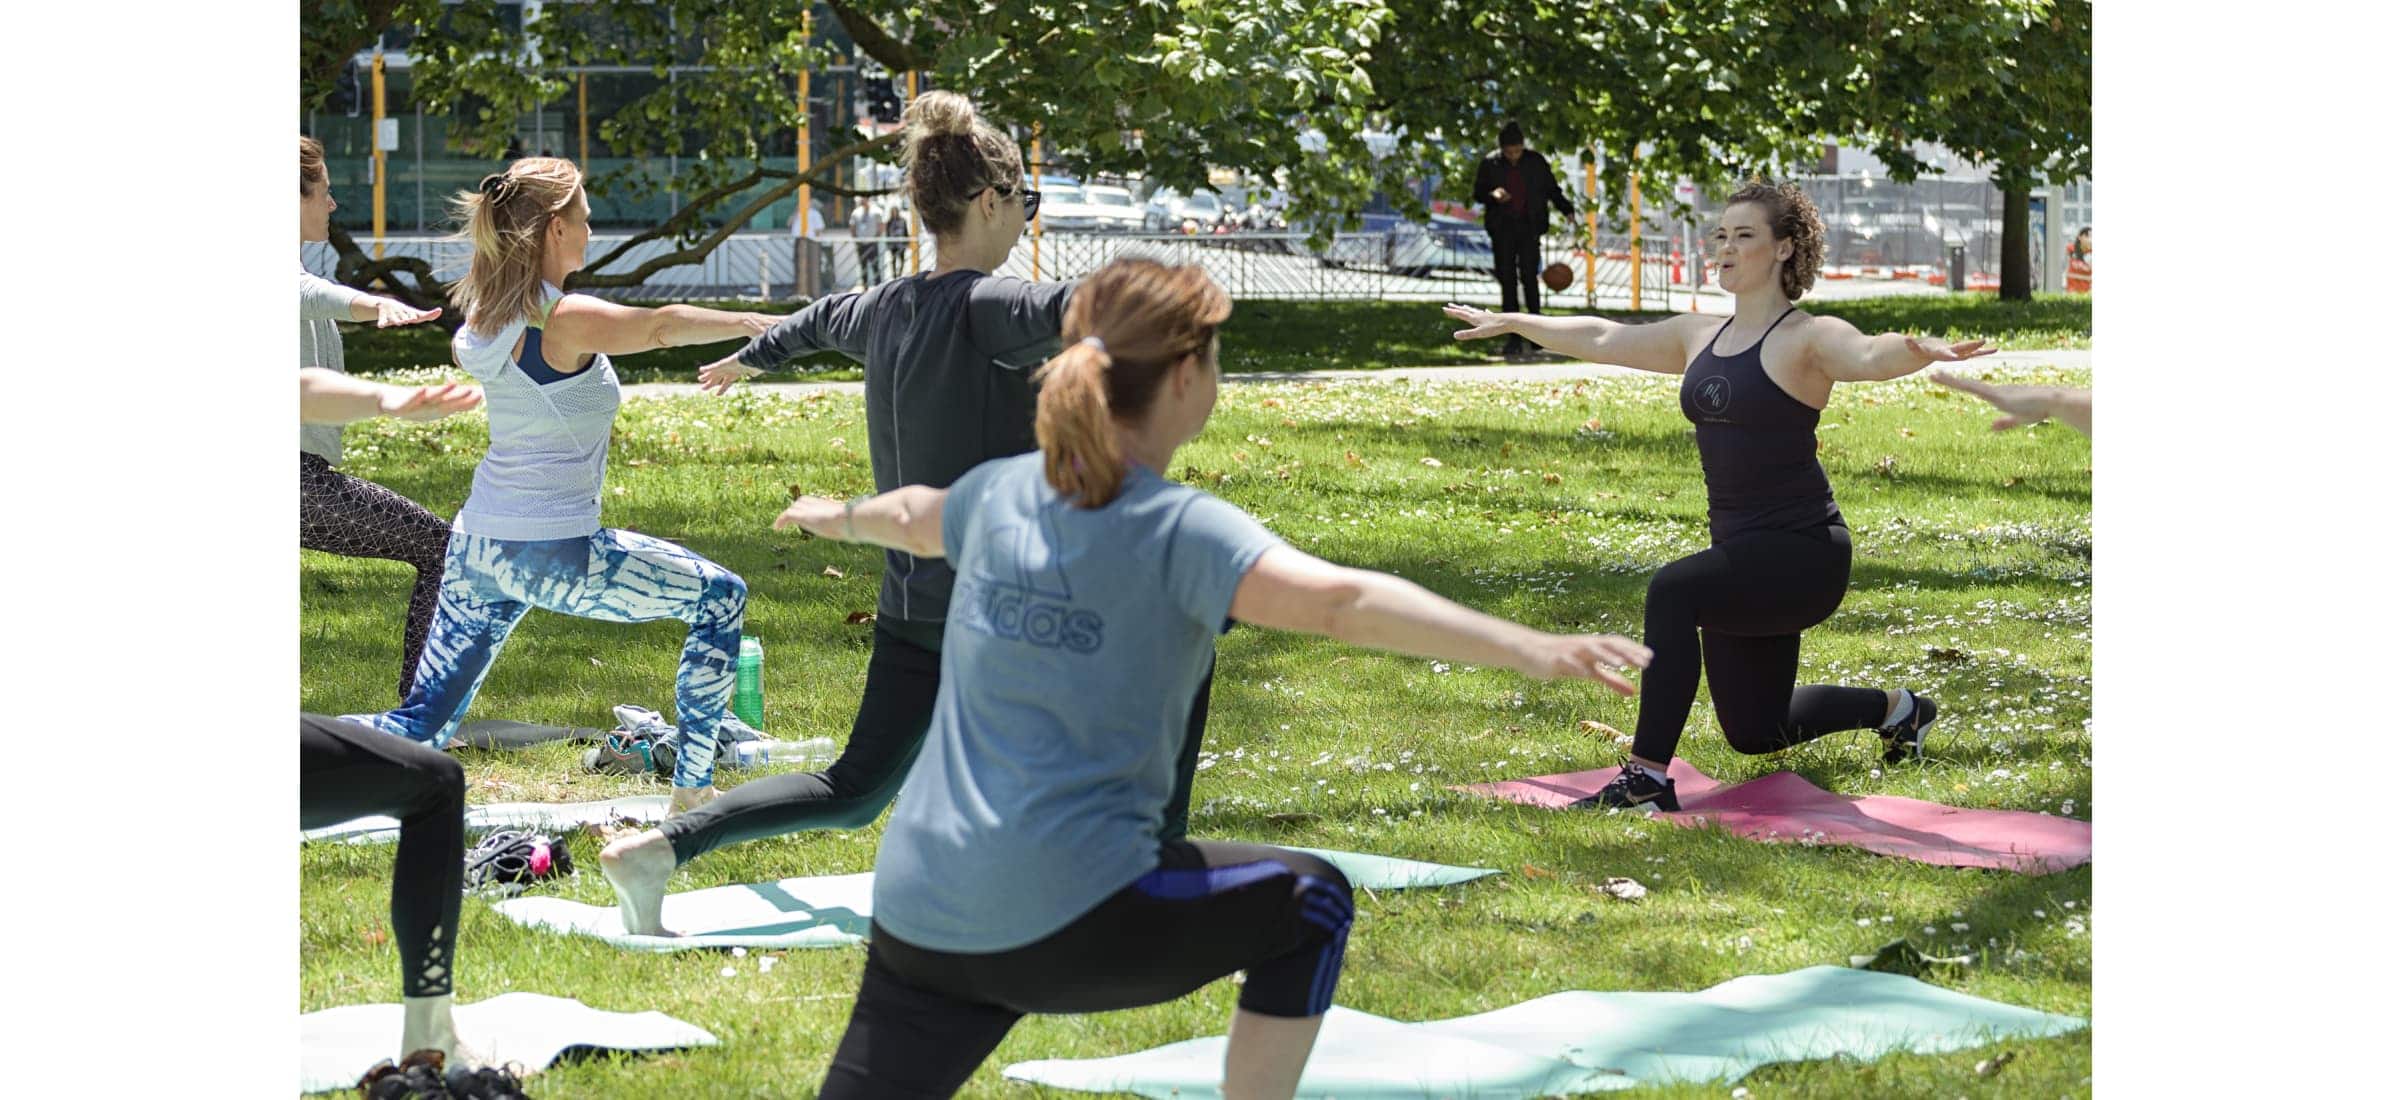 Phoebe Heyhoe from MatWorks Pilates leading a pilates class in a park.